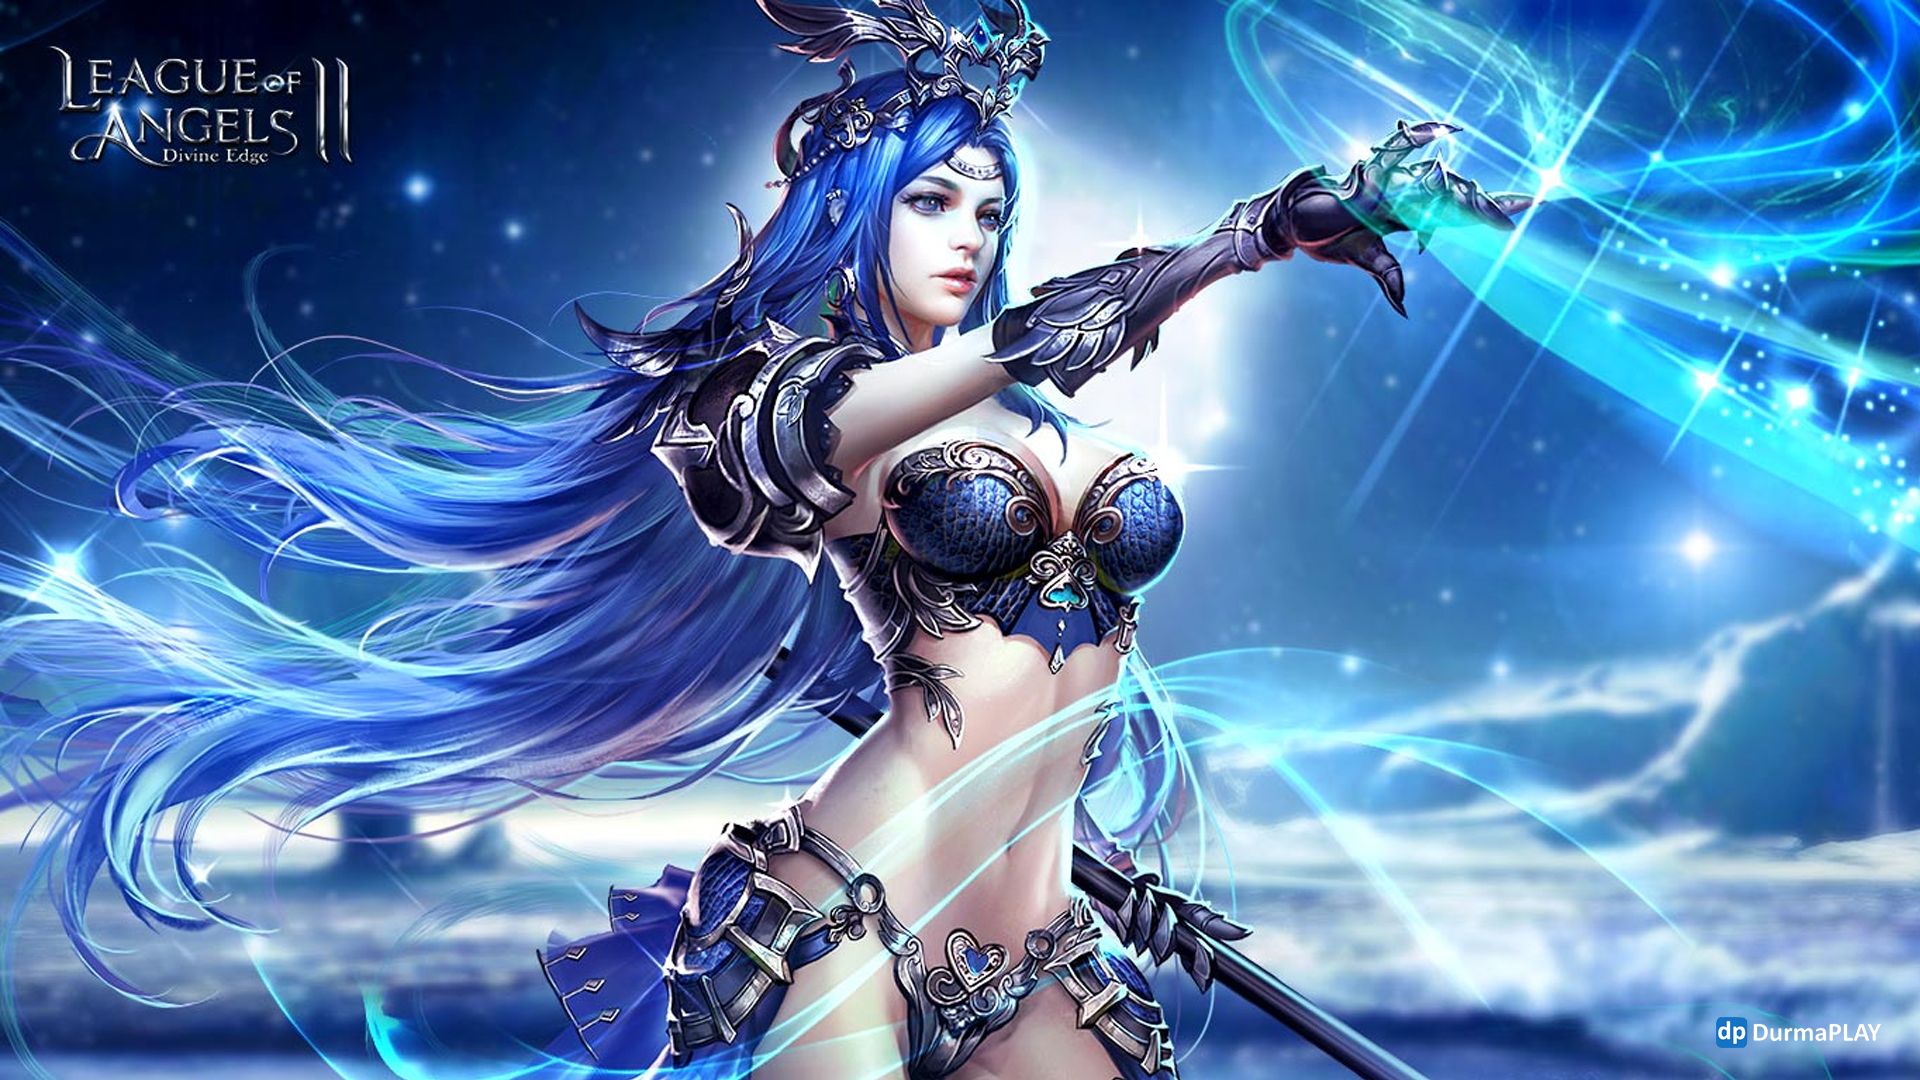 League Of Angels Ii Characters Aurora Angel Of Arctic Armor Decorated With Rare Precious Stone Desktop HD Wallpaper For Pc Tablet And Mobile 1920x1080, Wallpaper13.com